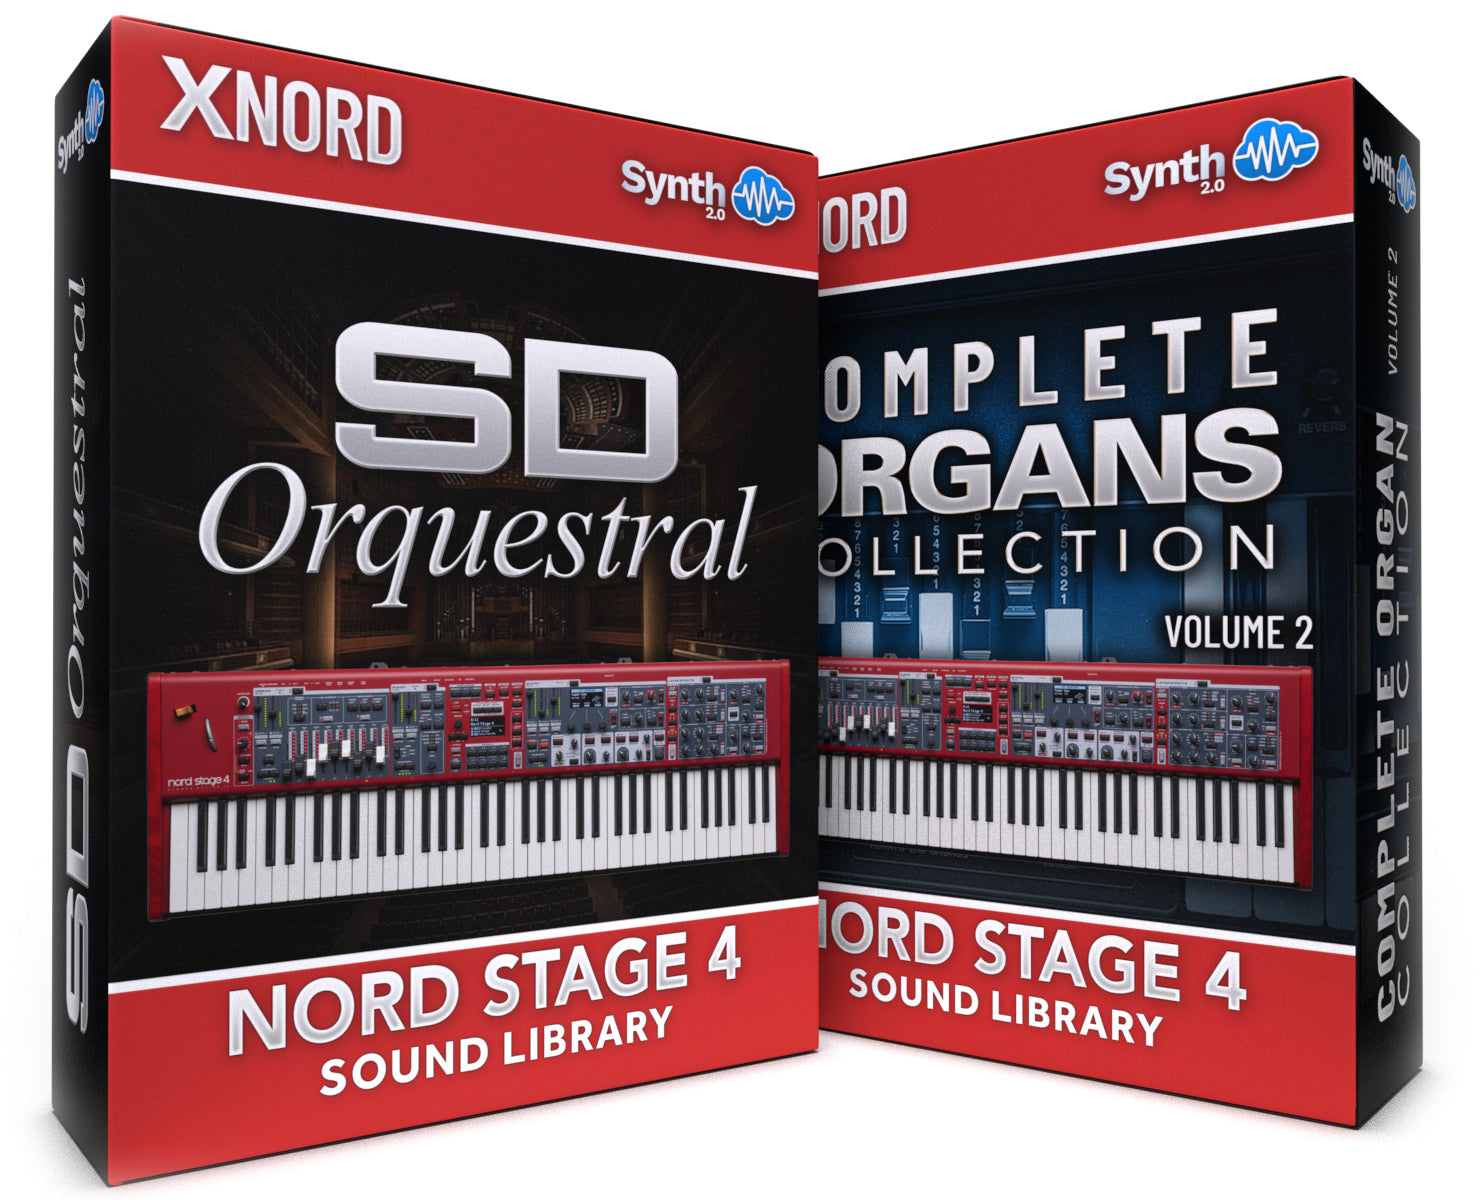 SCL414 - ( Bundle ) - SD Orquestral + Complete Organs Collection V2 - Nord Stage 4